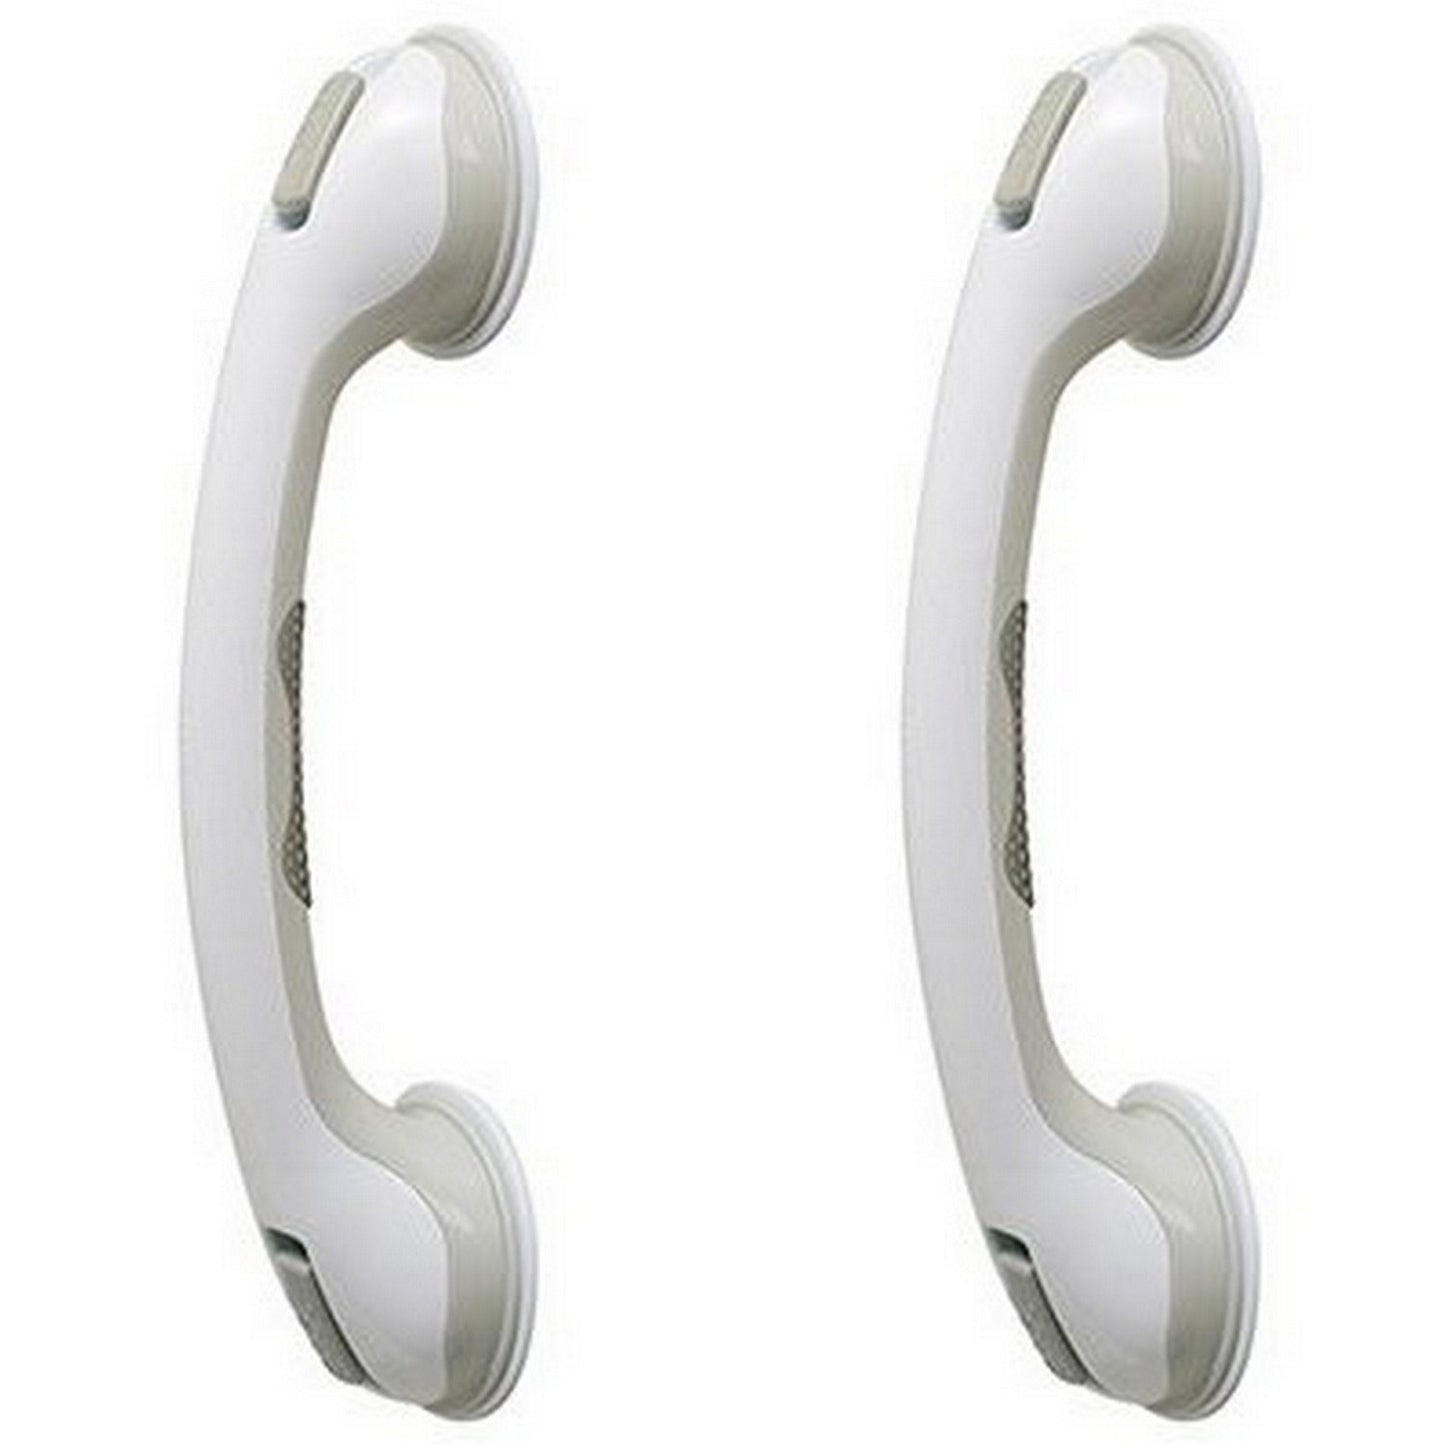 Mommy's Helper Grip Bath and Shower Handle 2 Pack, 16.5"